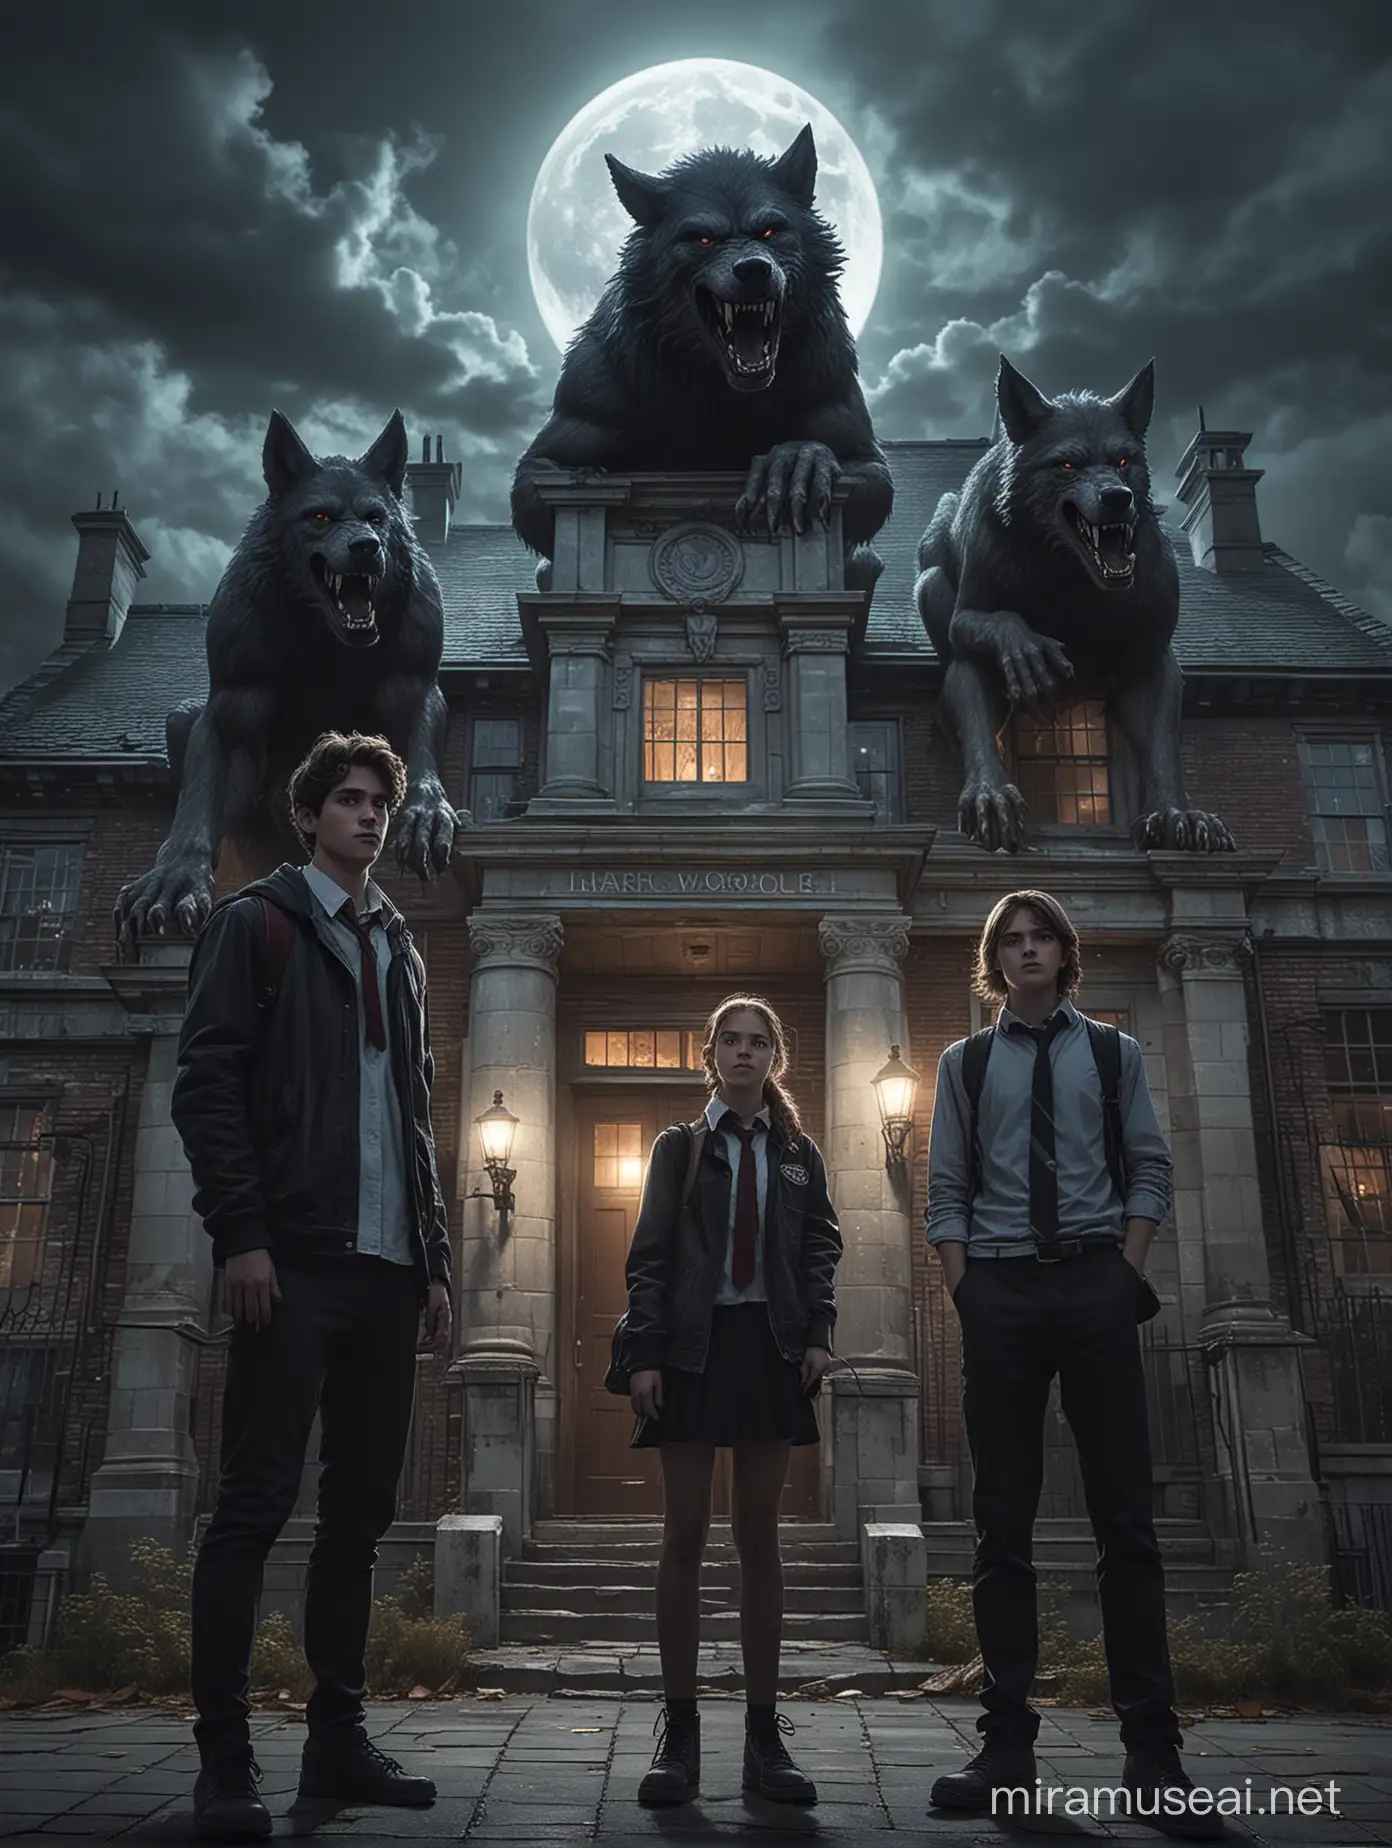 Students Confronting Werewolves Outside Mythical High School